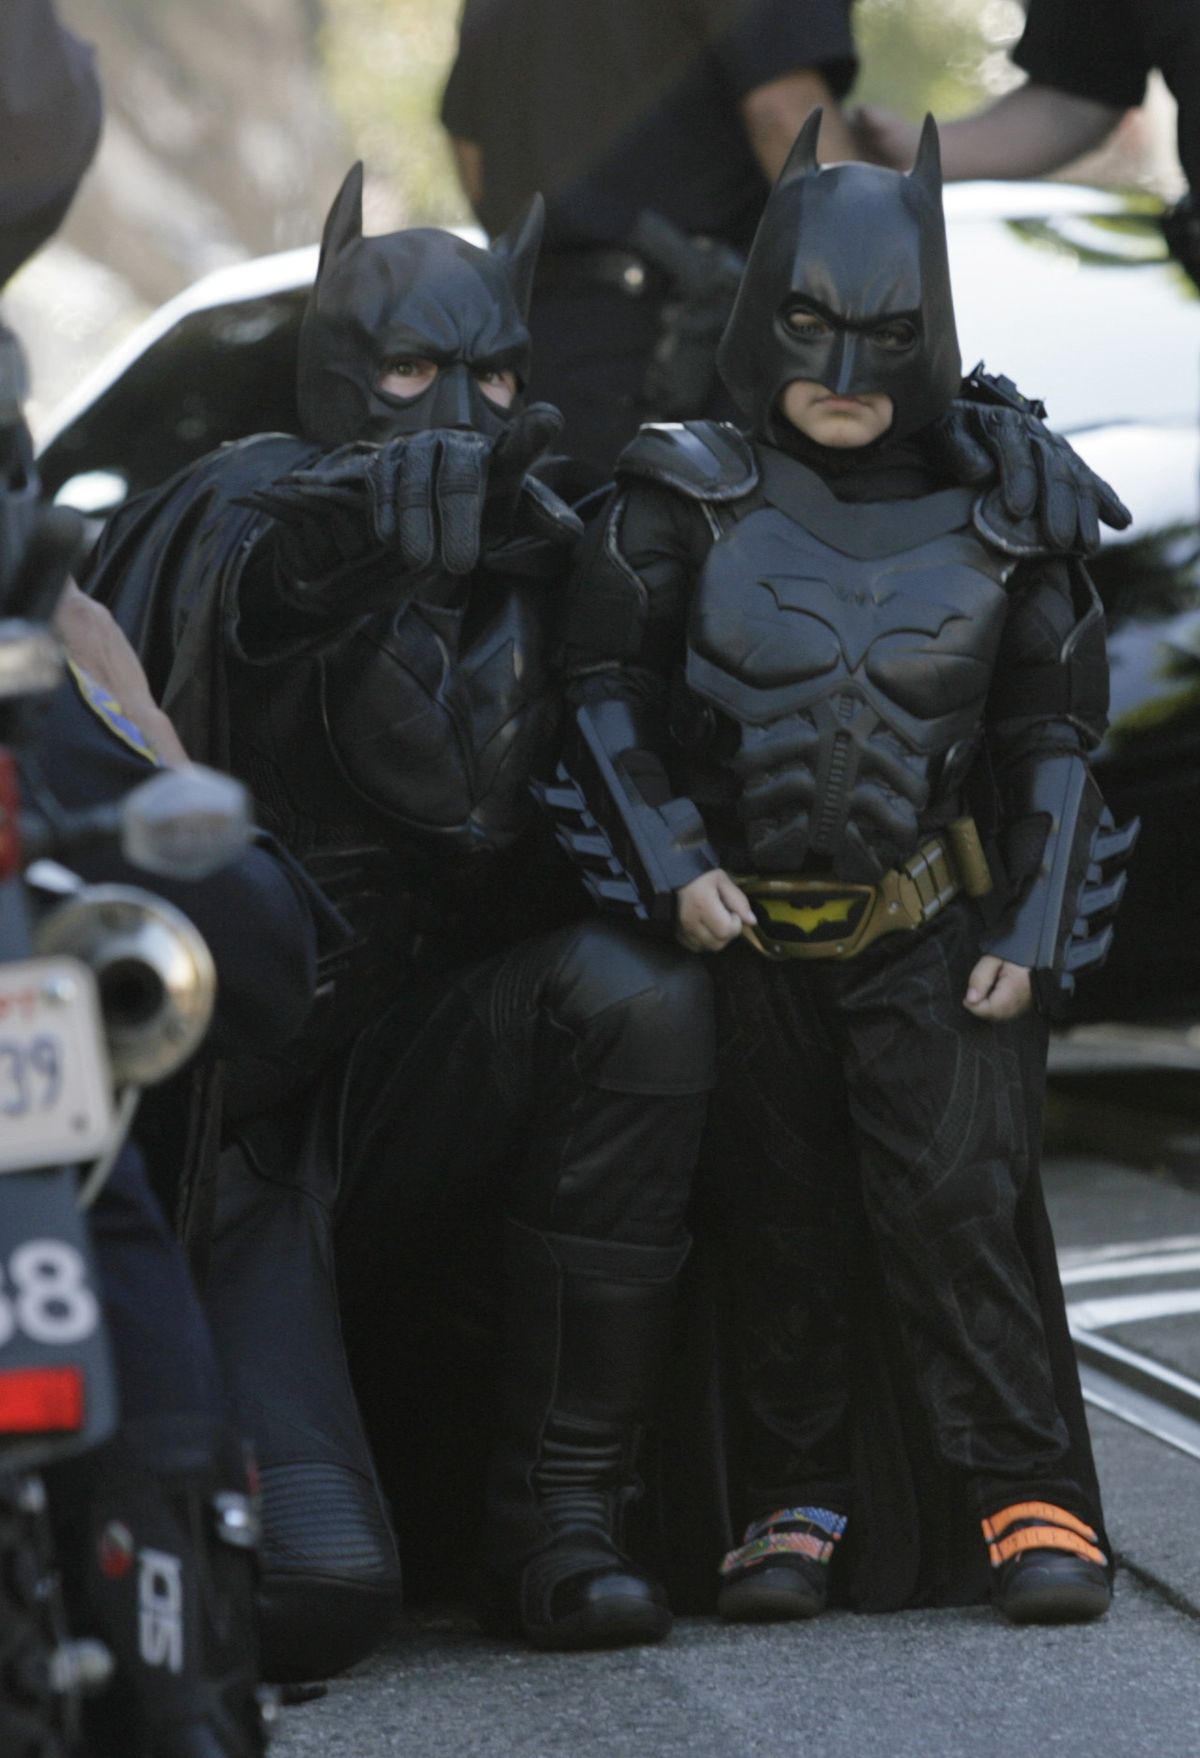 Batman assists Batkid Miles Scott, 5, as he prepares to save a damsel in distress Friday in San Francisco.